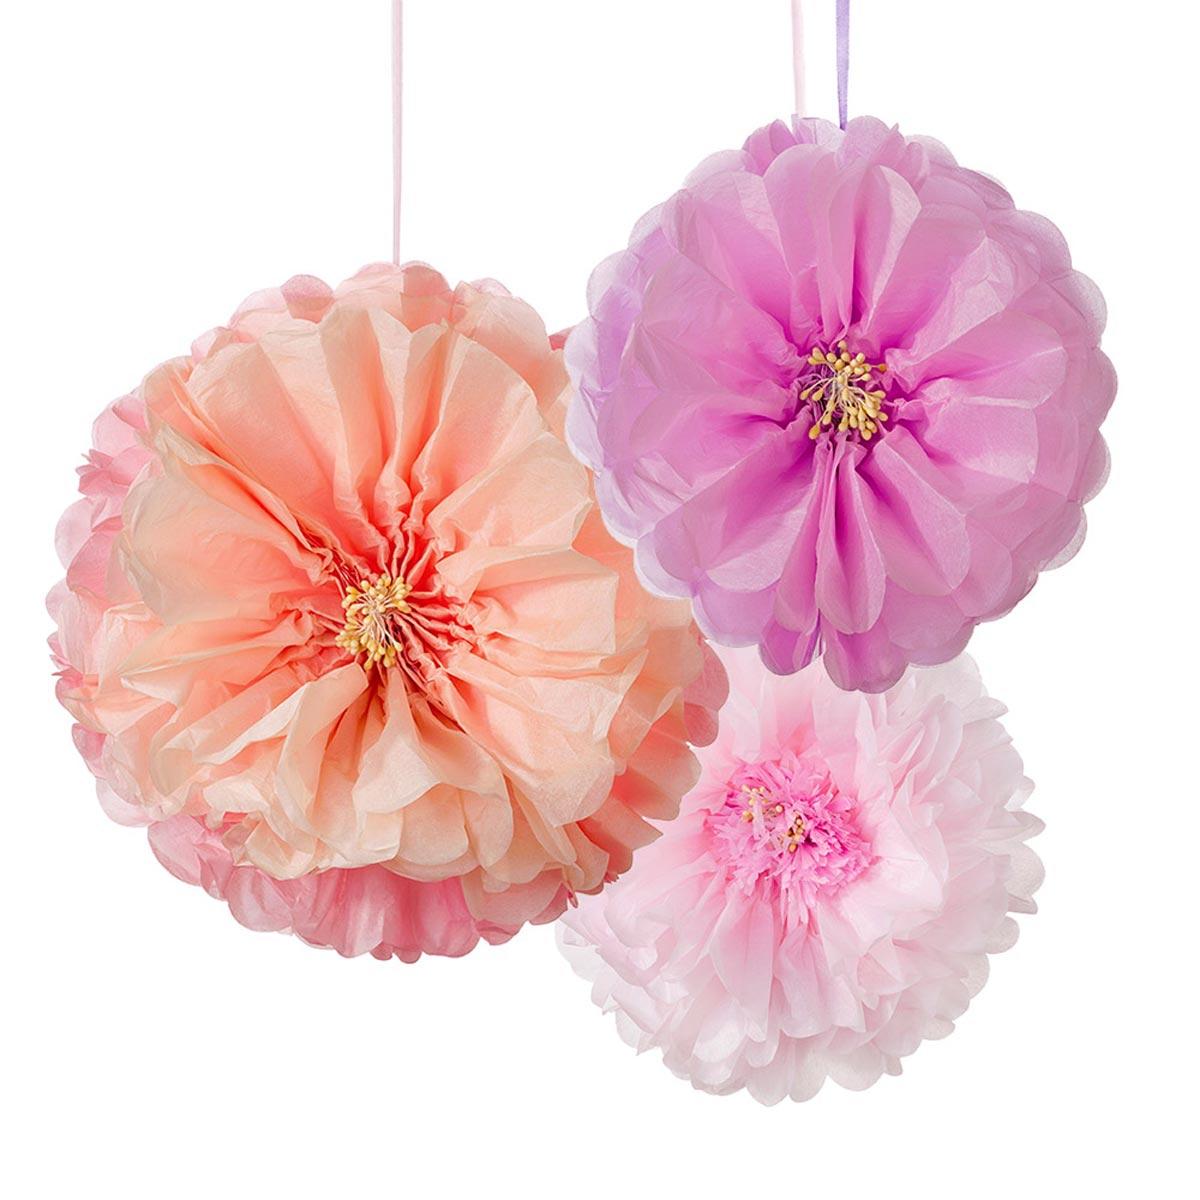 Pack of 3 Decadent Decorations Blush Flower Pom Poms by Talking Tables POMFLOWER-BLUSH available here at Karnival Costumes online party shop